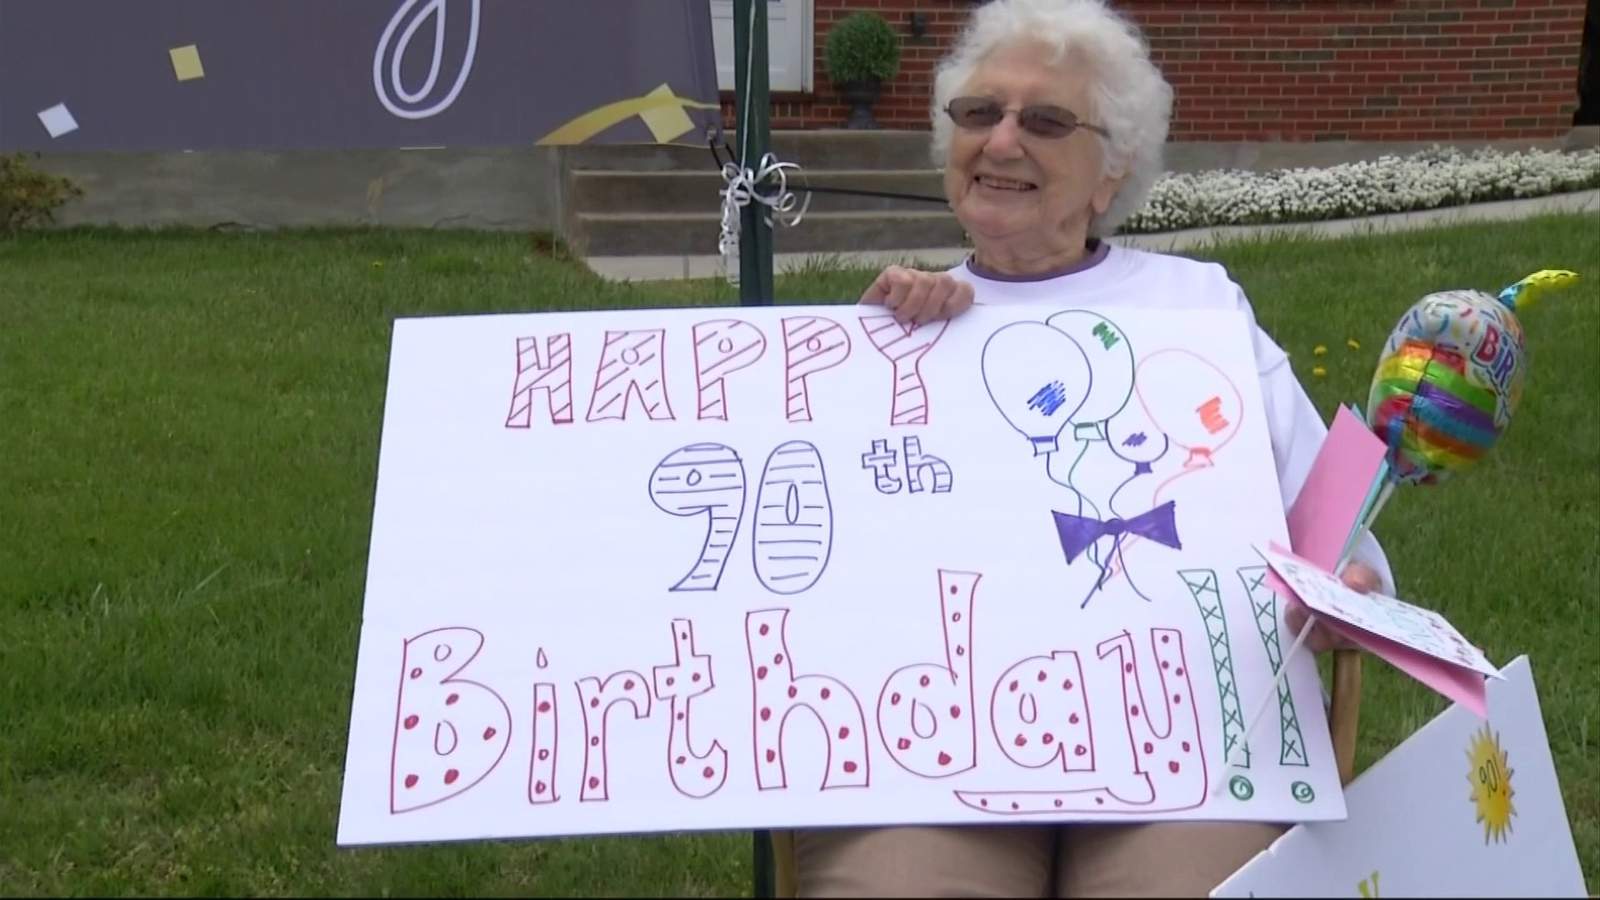 Woman celebrating 90th birthday surprised with parade in her honor